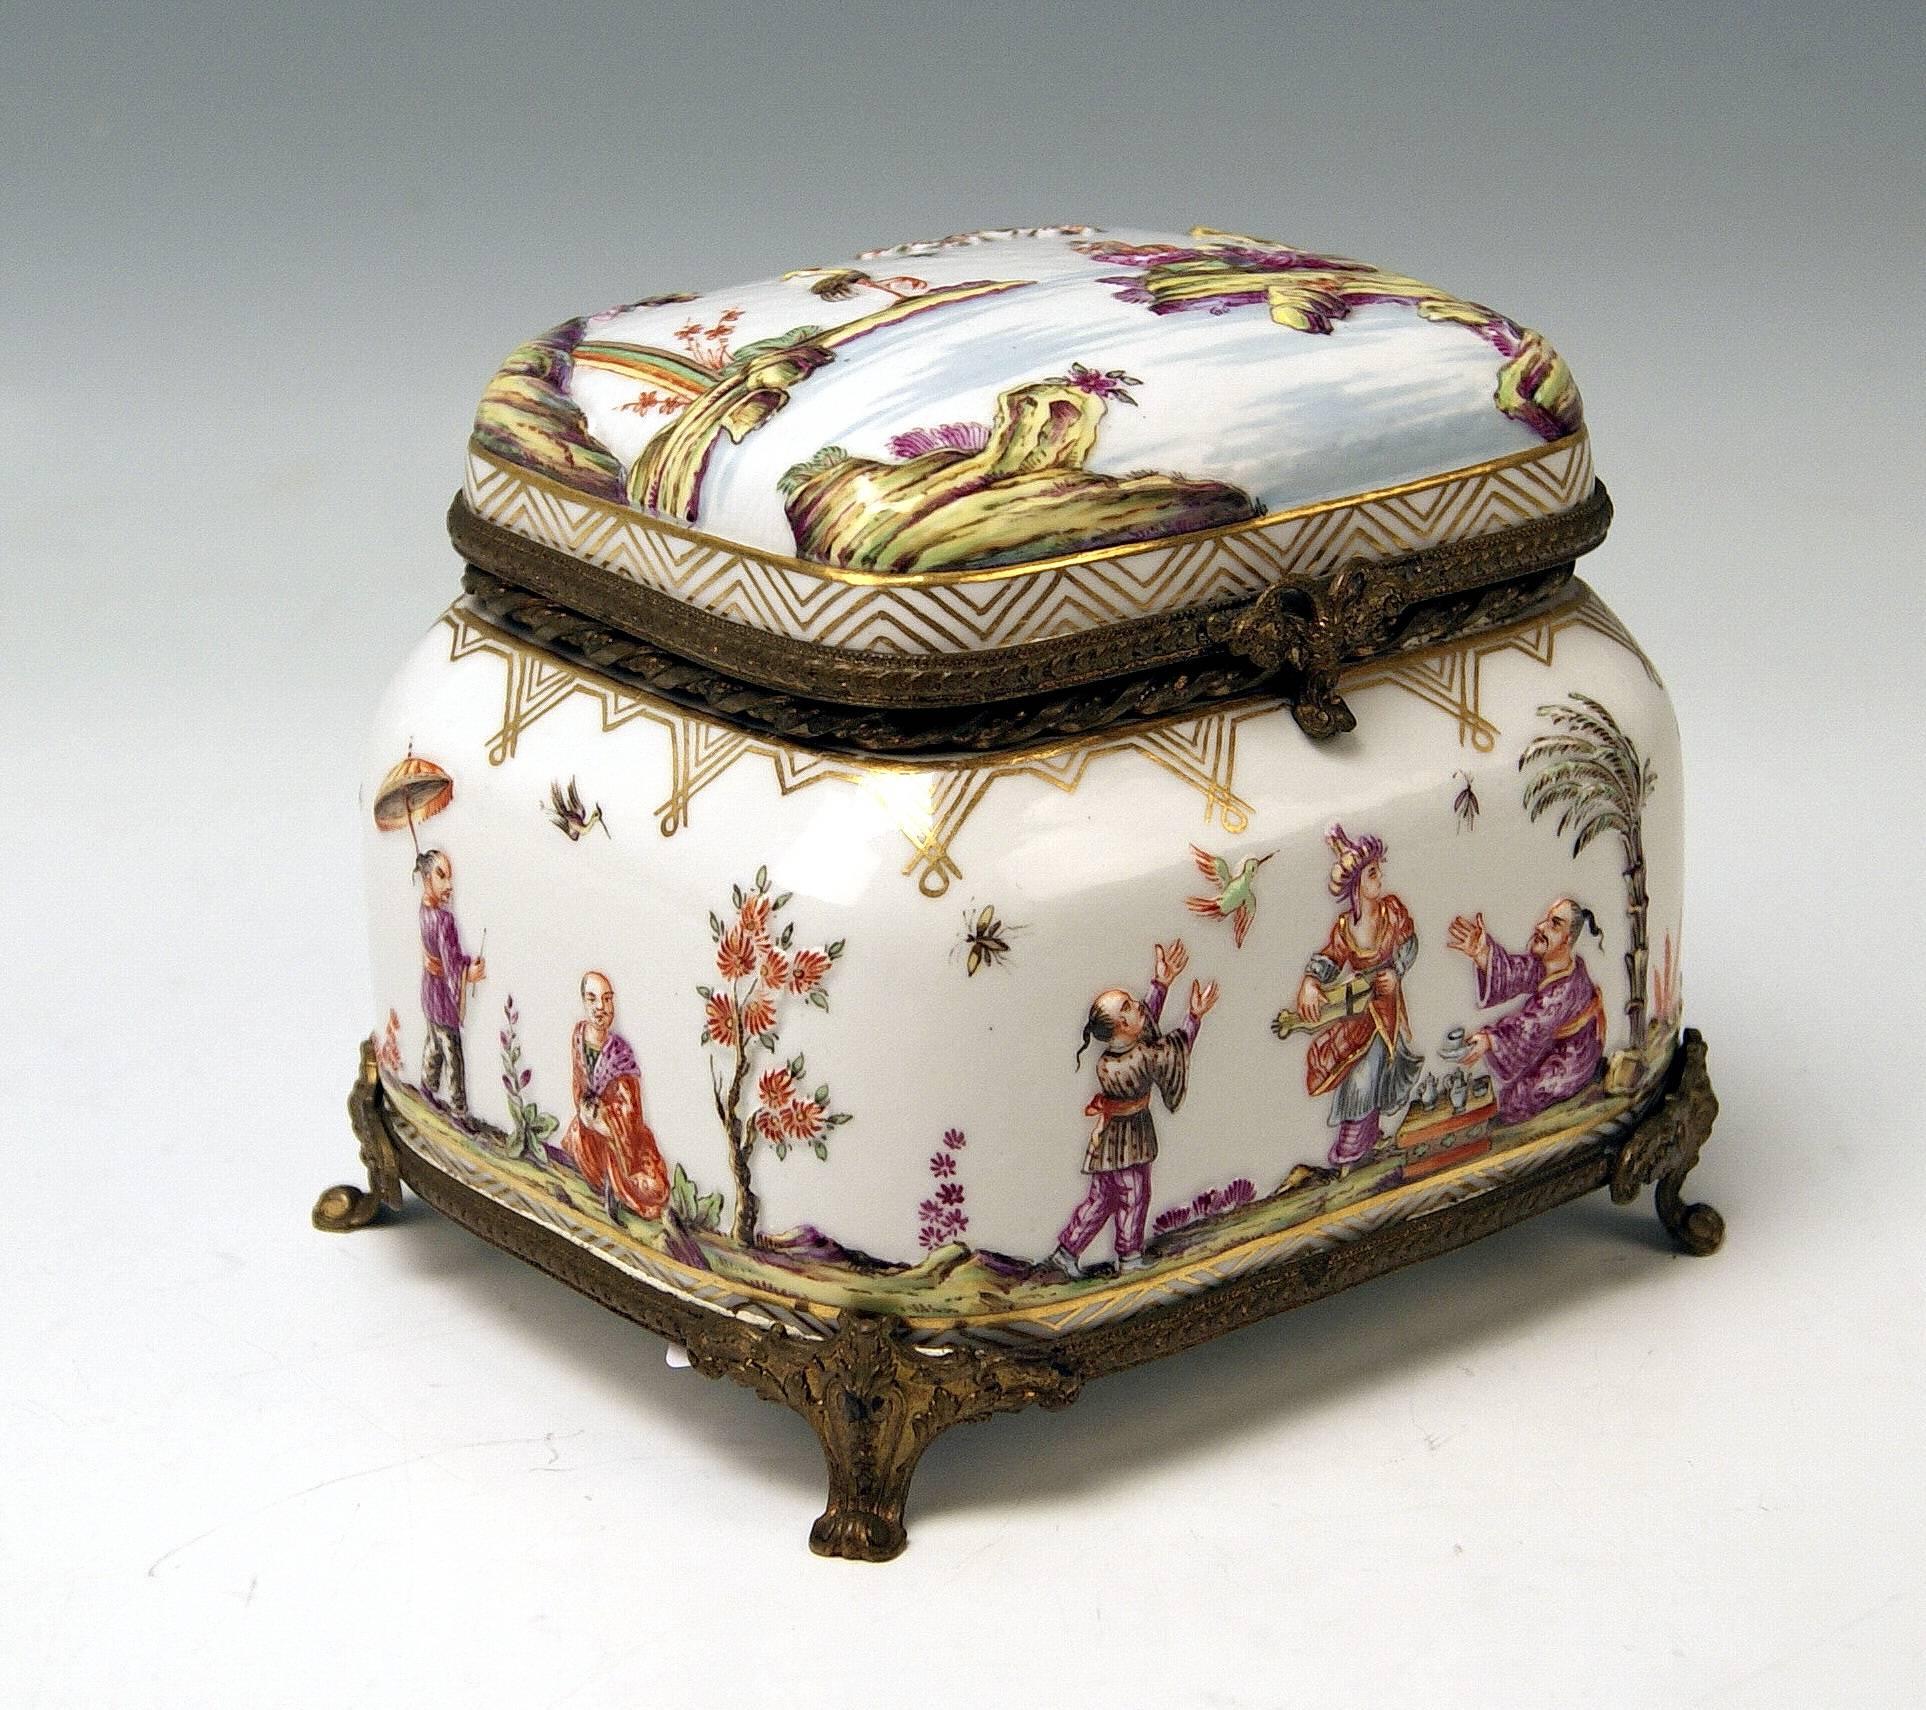 Meissen gorgeous lidded box with multicolored decorations (chinoiserie) of relief type, the box is edged by brass mountings, circa 1850.
Measures:
Height: 12.5 cm (= 4.92 inches).
Width: 14.0 cm (= 5.51 inches).
Depth: 11.5 cm (= 4.52 inches).